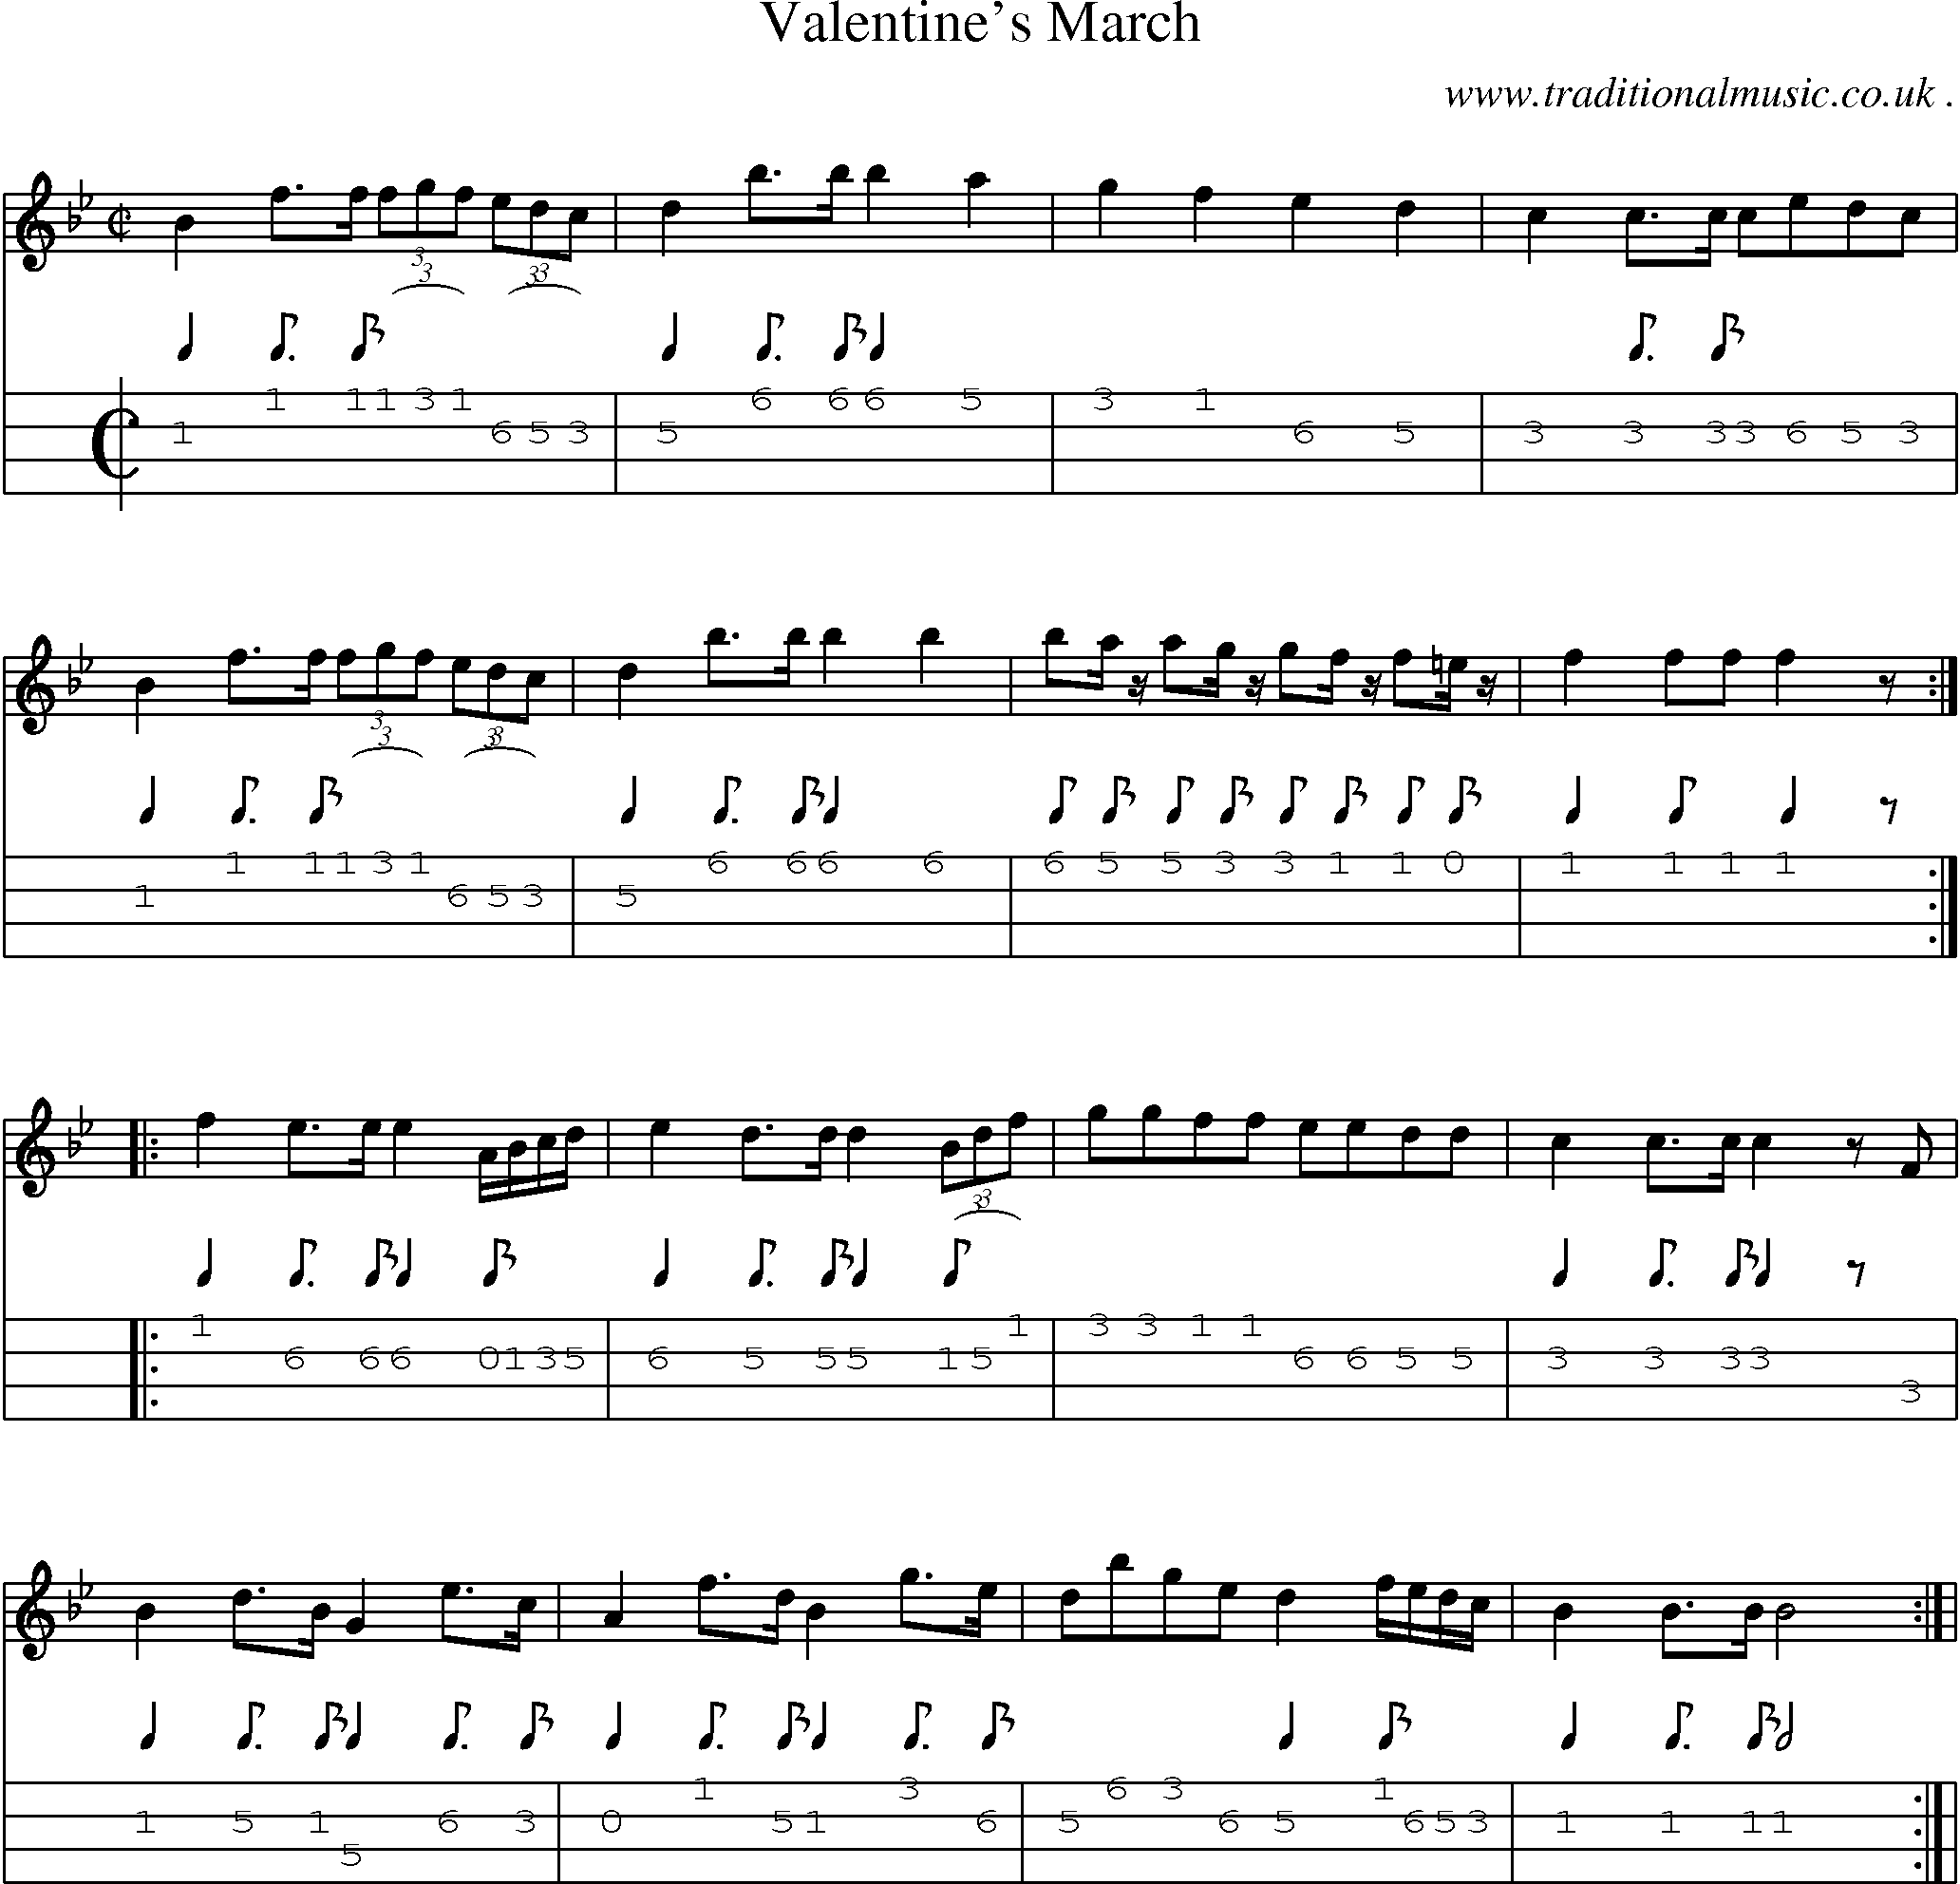 Sheet-Music and Mandolin Tabs for Valentines March